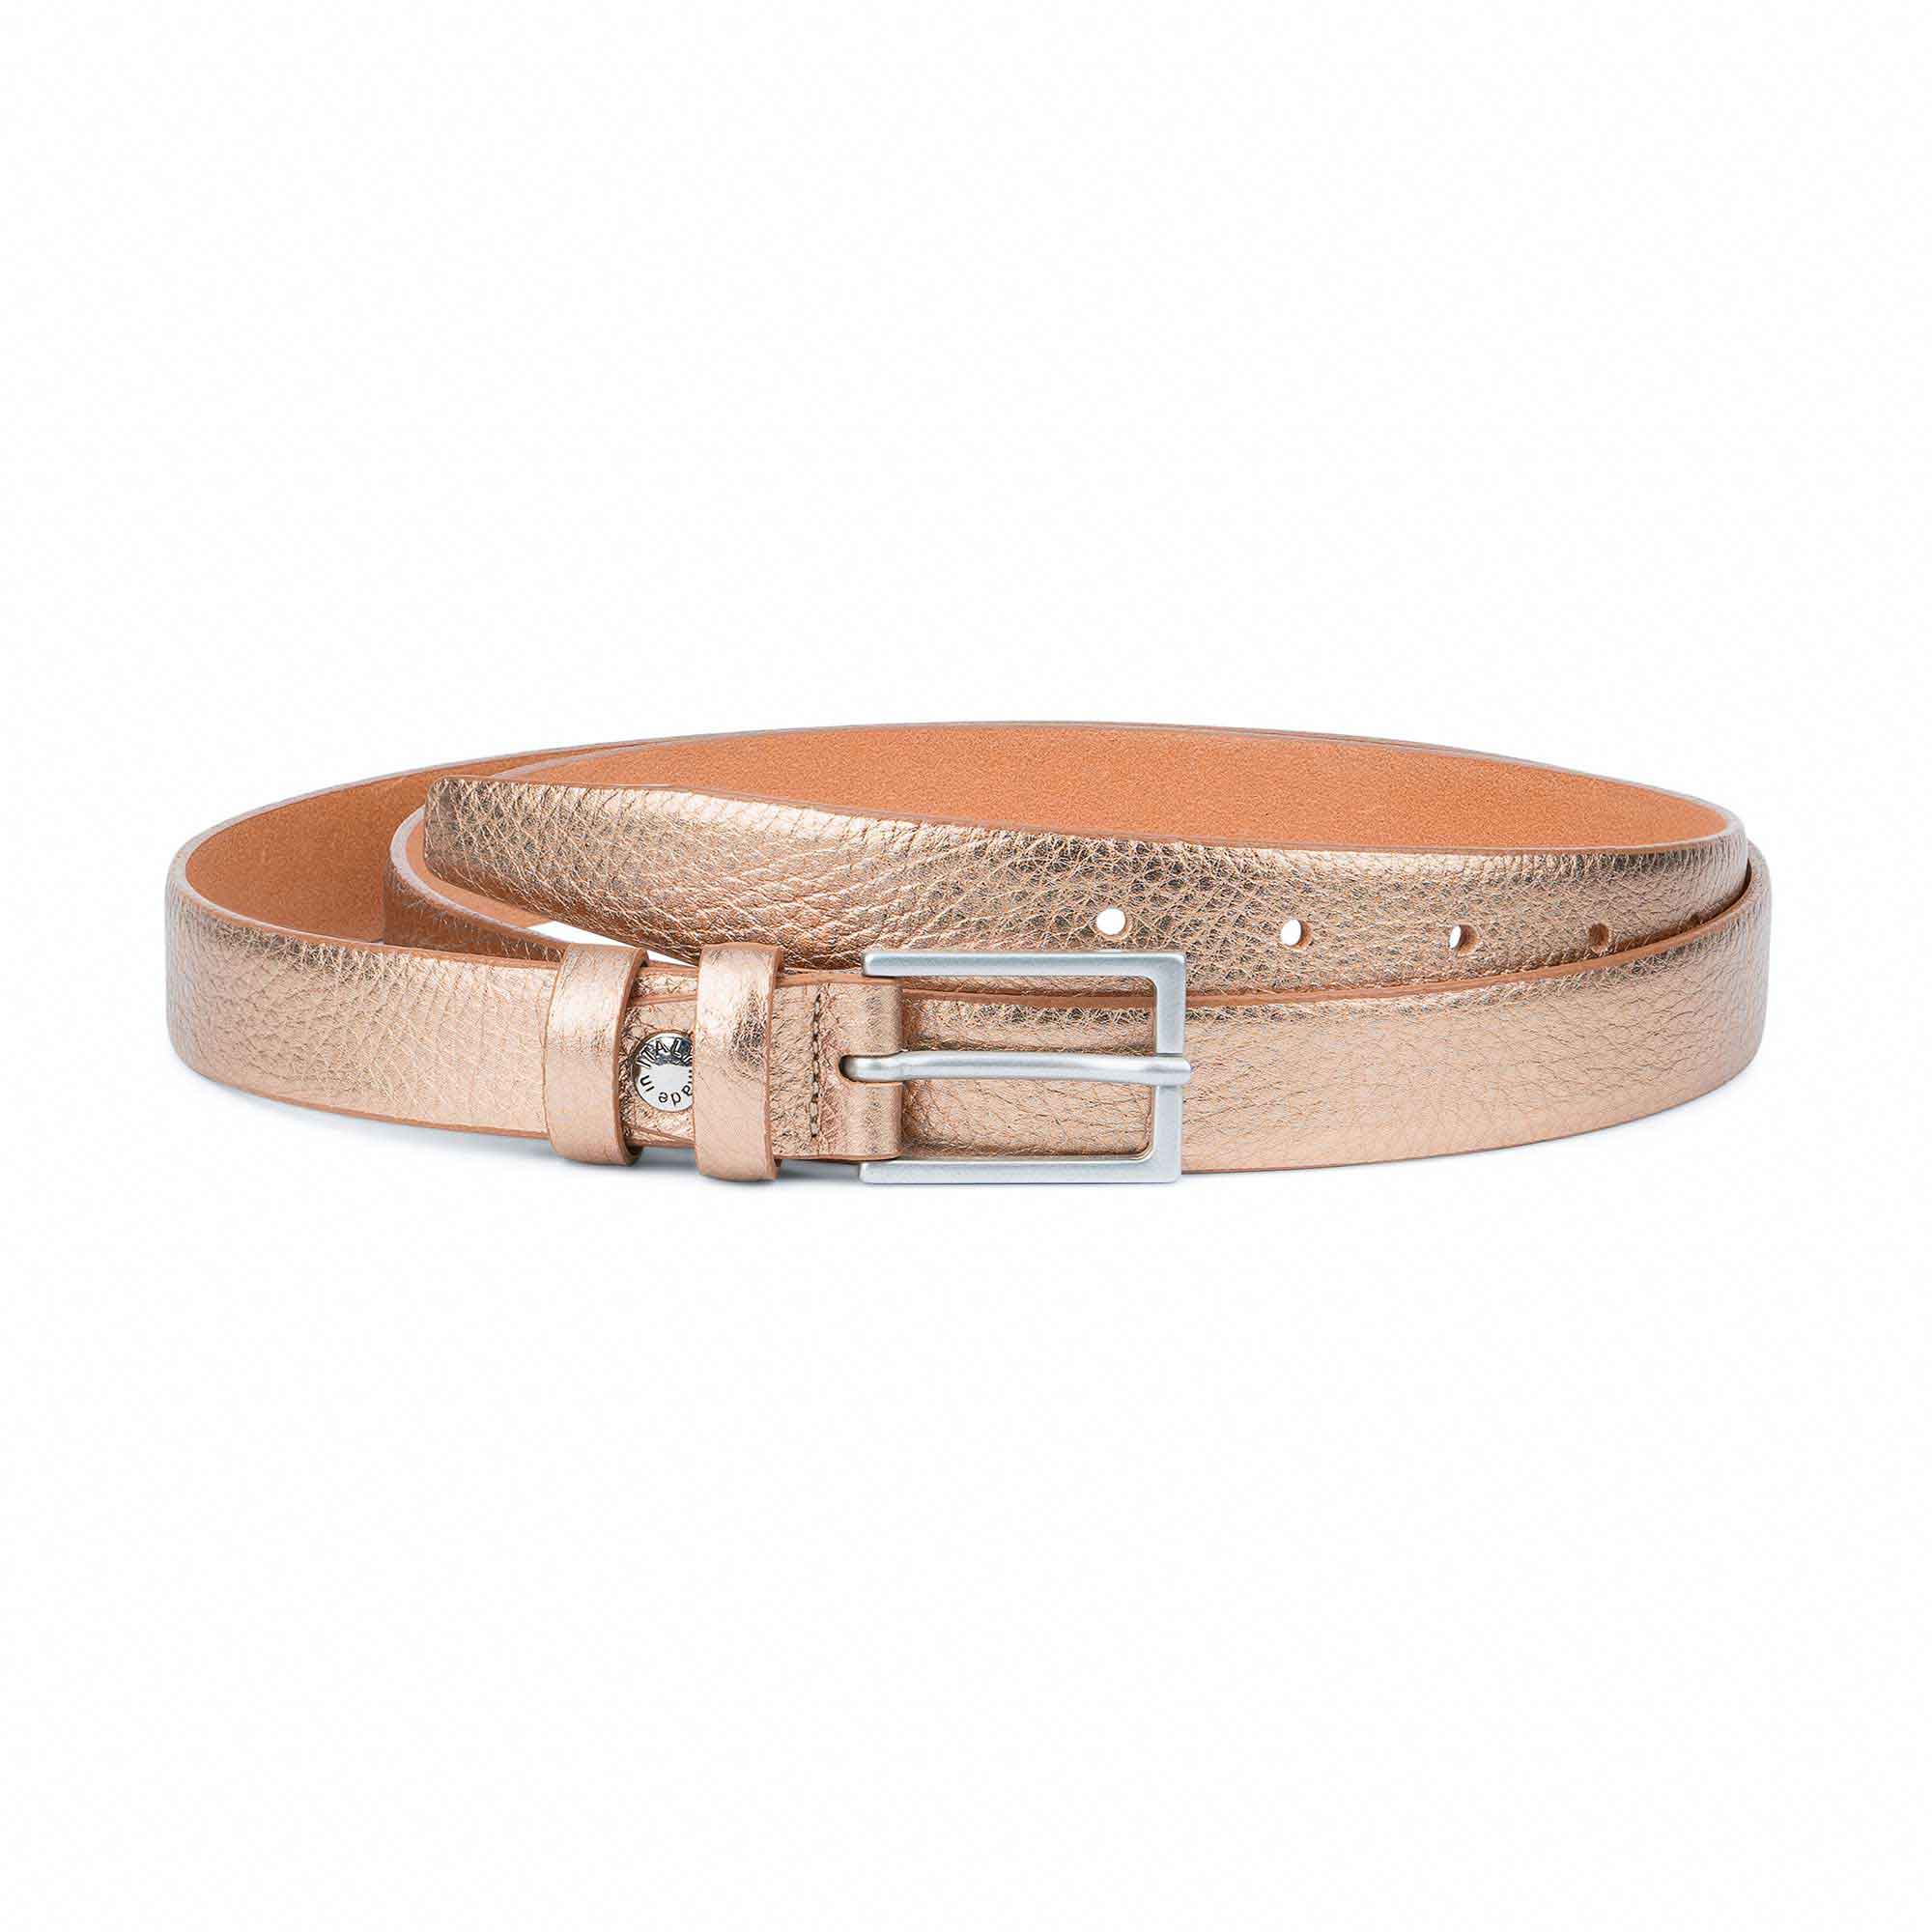 Rose Gold Belt Womens Leather Belts For Dress Thin Narrow 1 inch 25 mm ...